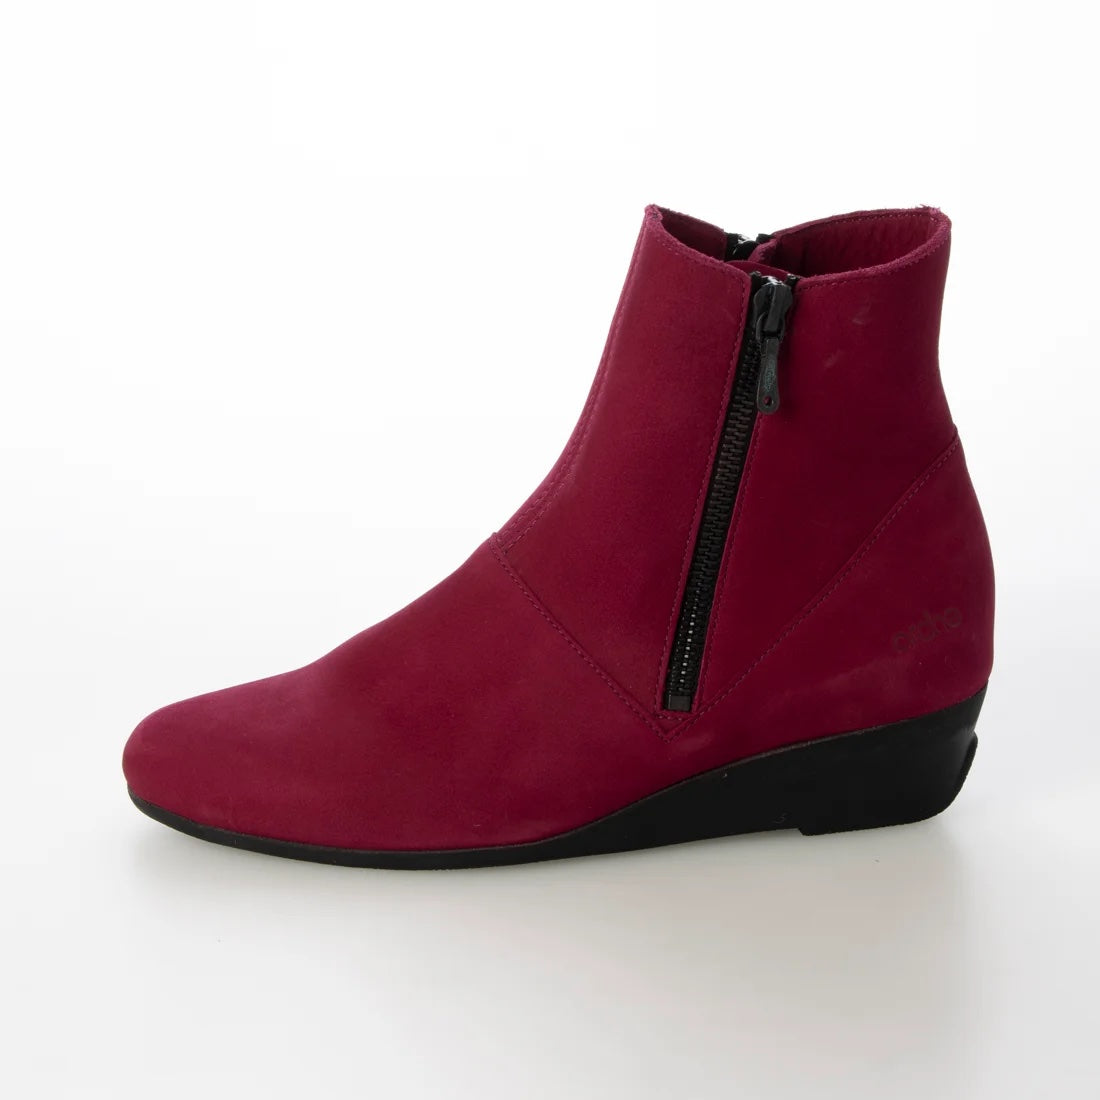 Chic & Simple Arche Boots Anykem - Griotte